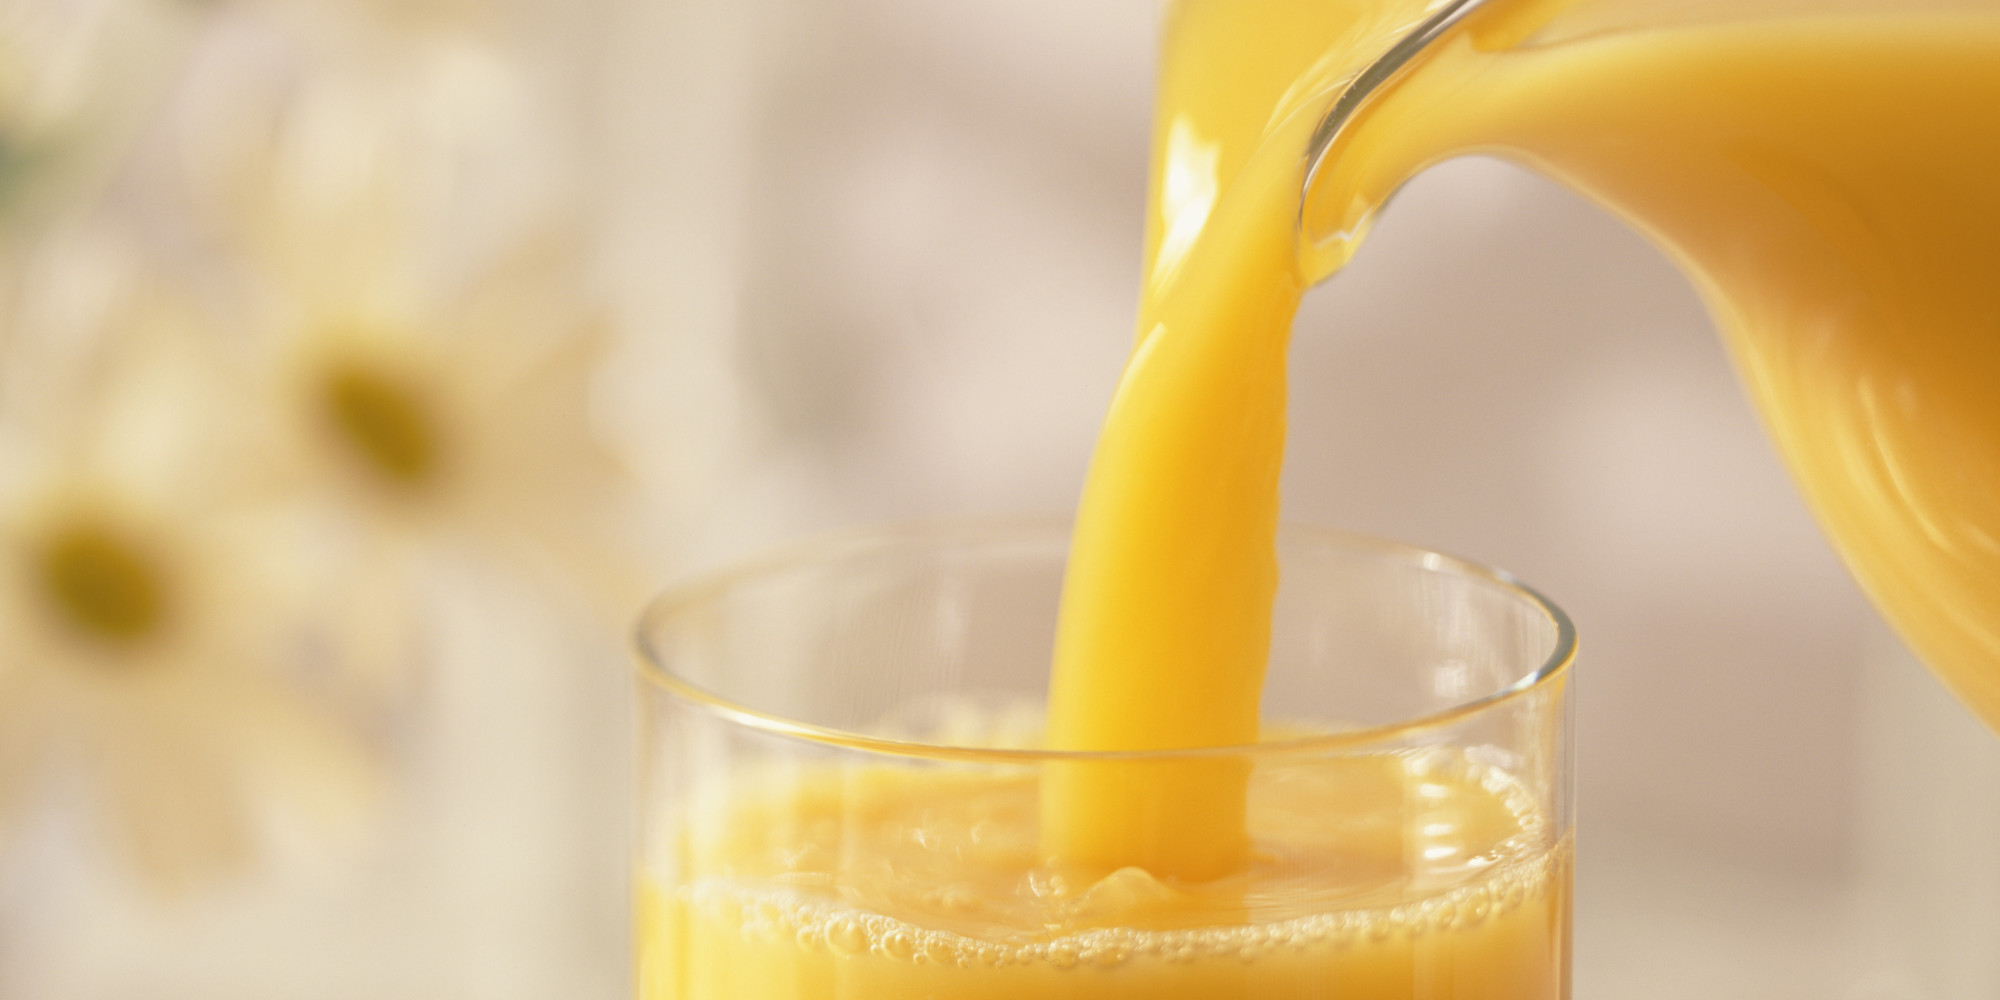 Drinking Orange Juice Every Day Can Improve Memory ...